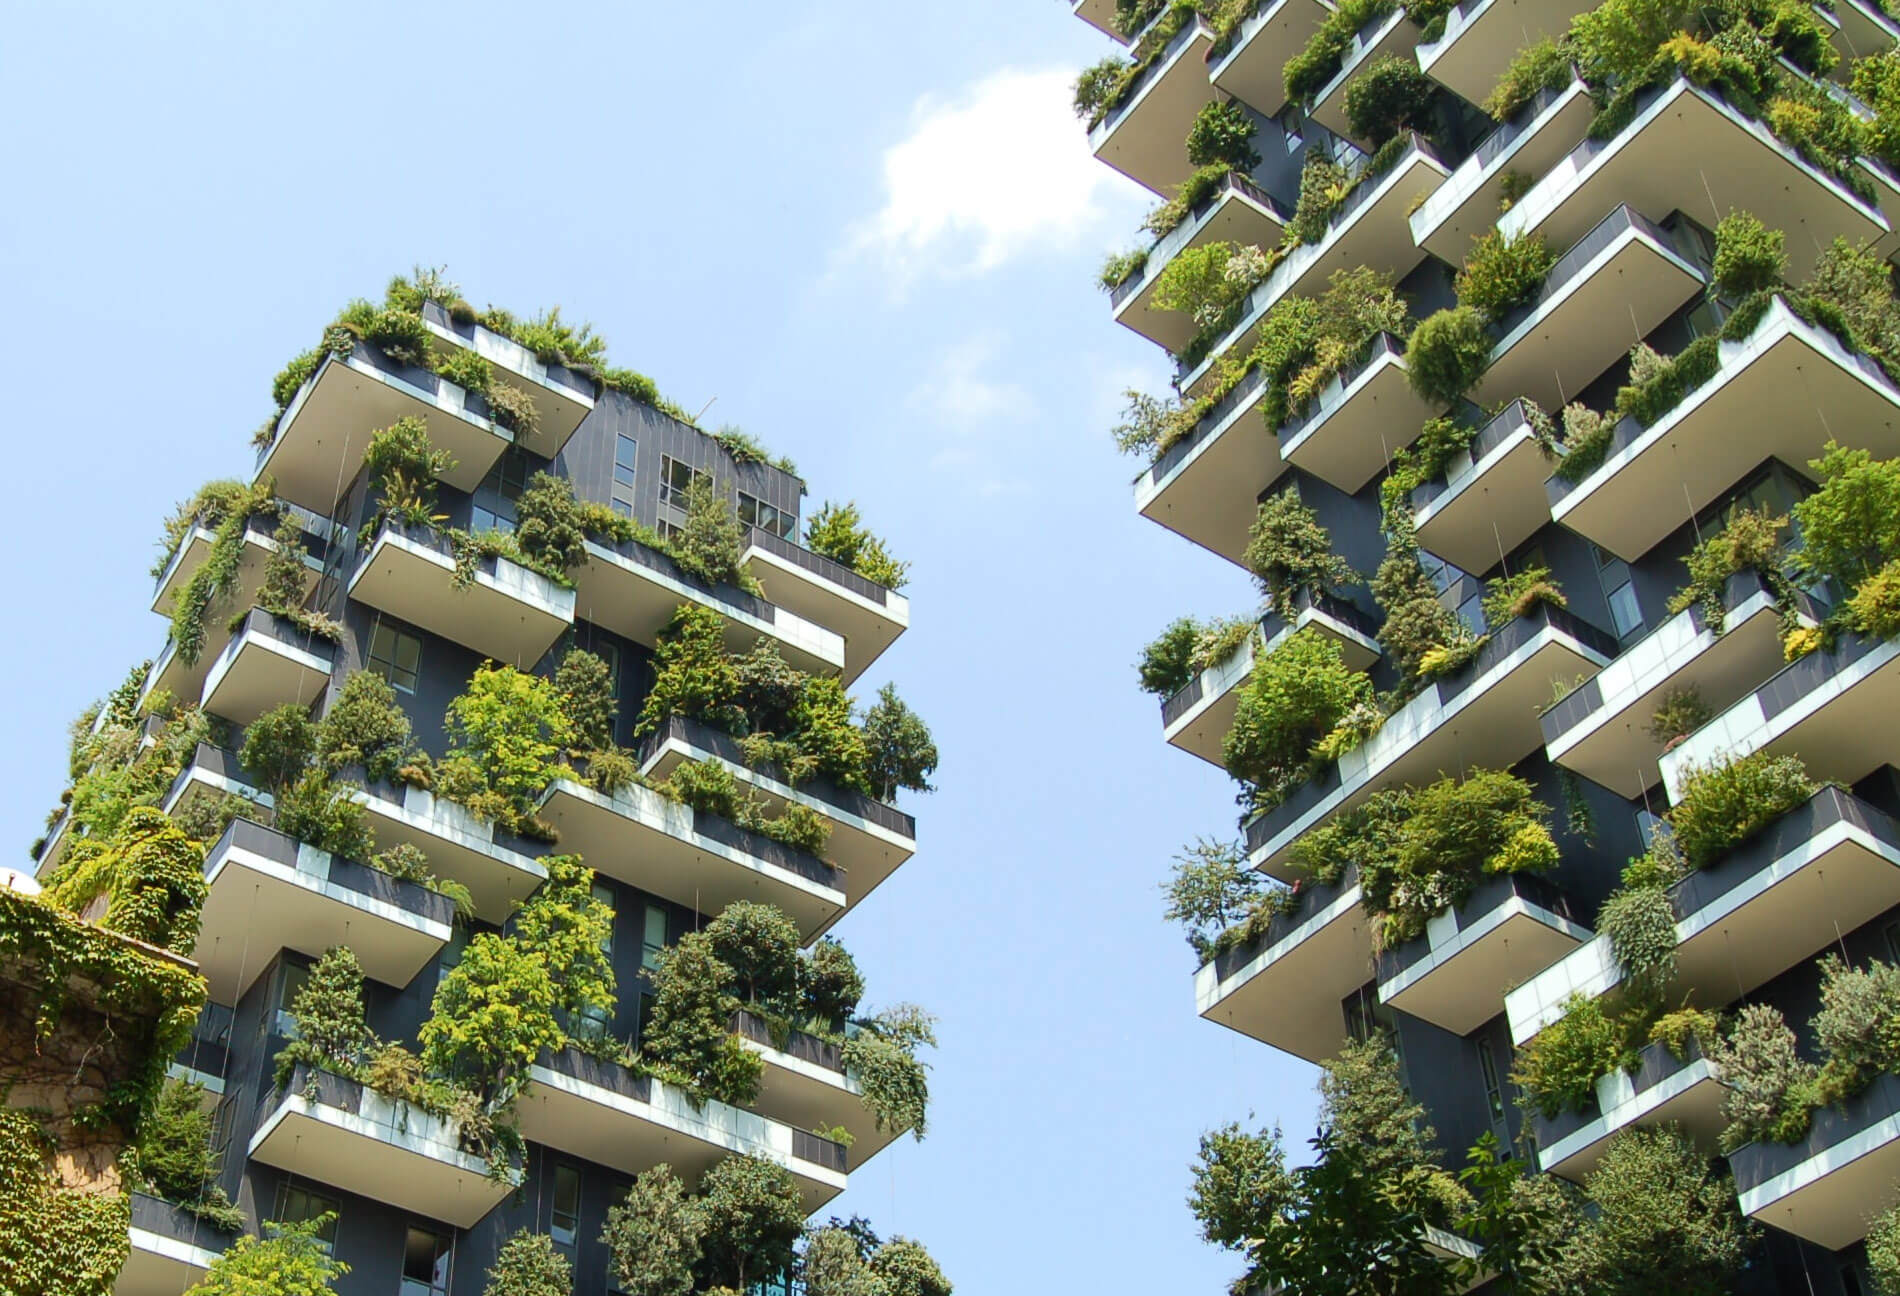 Buildings Sustainability is Key